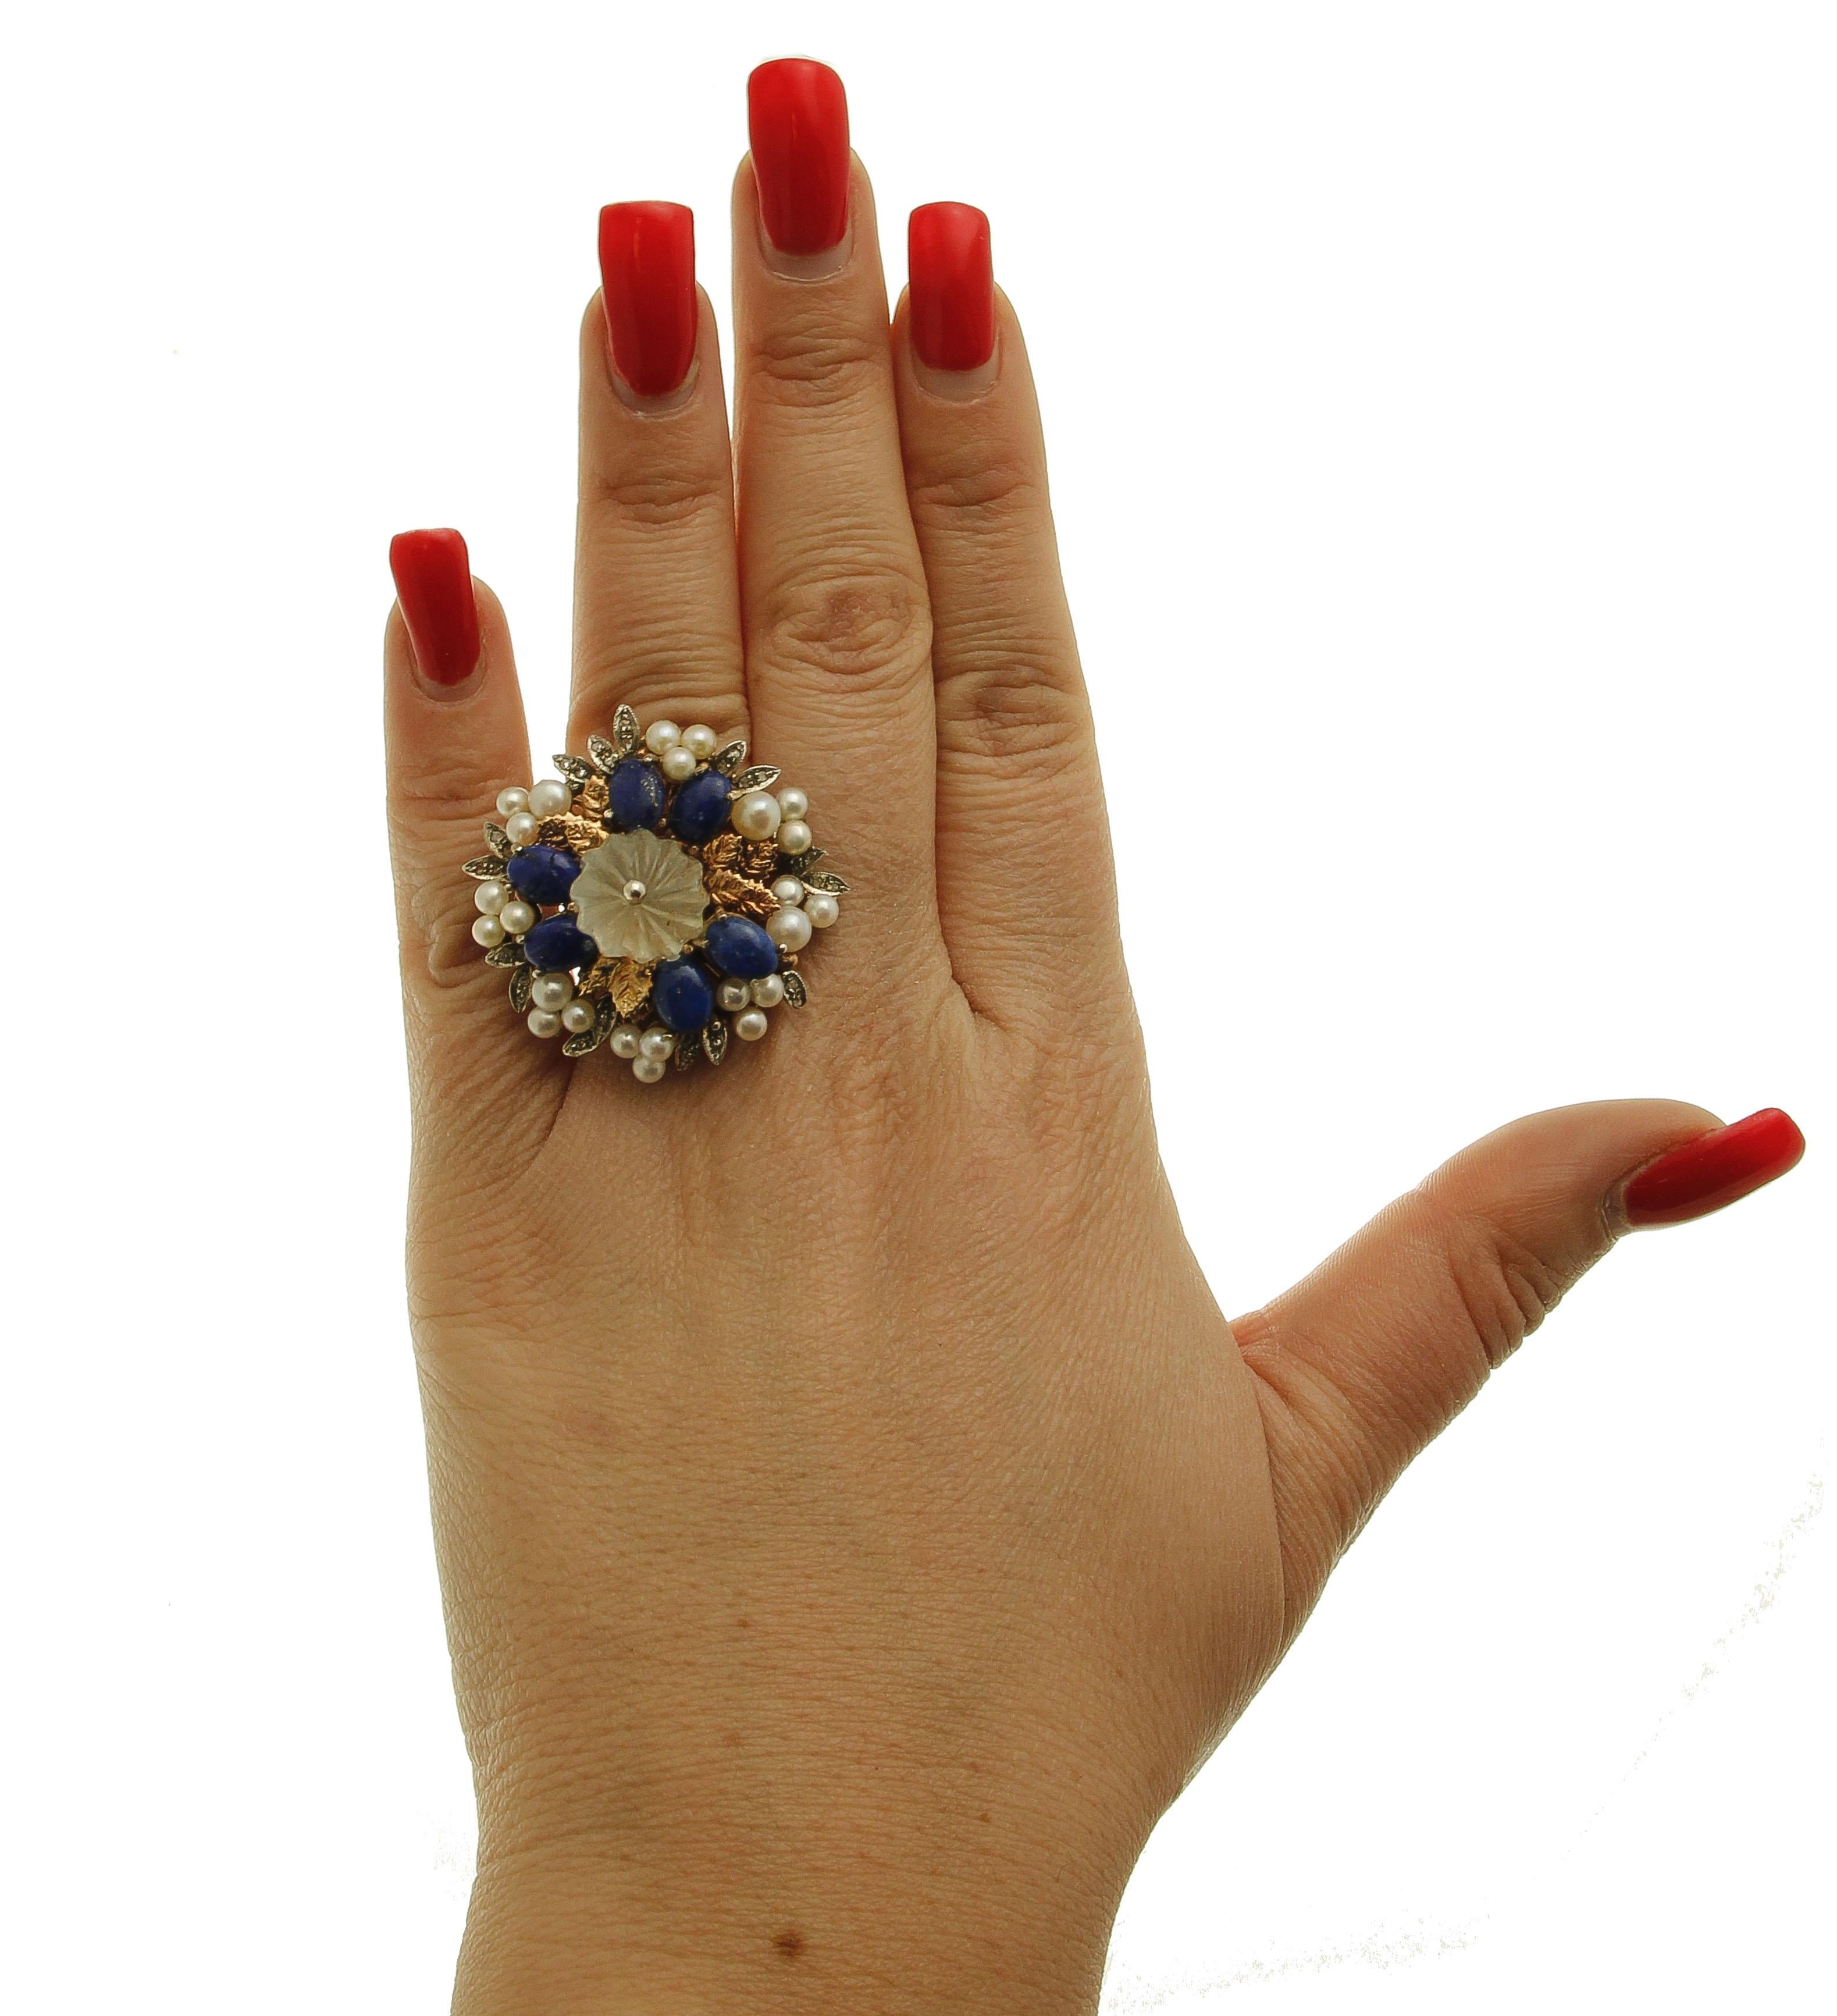 Diamonds, Lapis Lazuli, Rock Crystal, Pearls, 9 Karat Rose Gold and Silver Ring In Good Condition For Sale In Marcianise, Marcianise (CE)